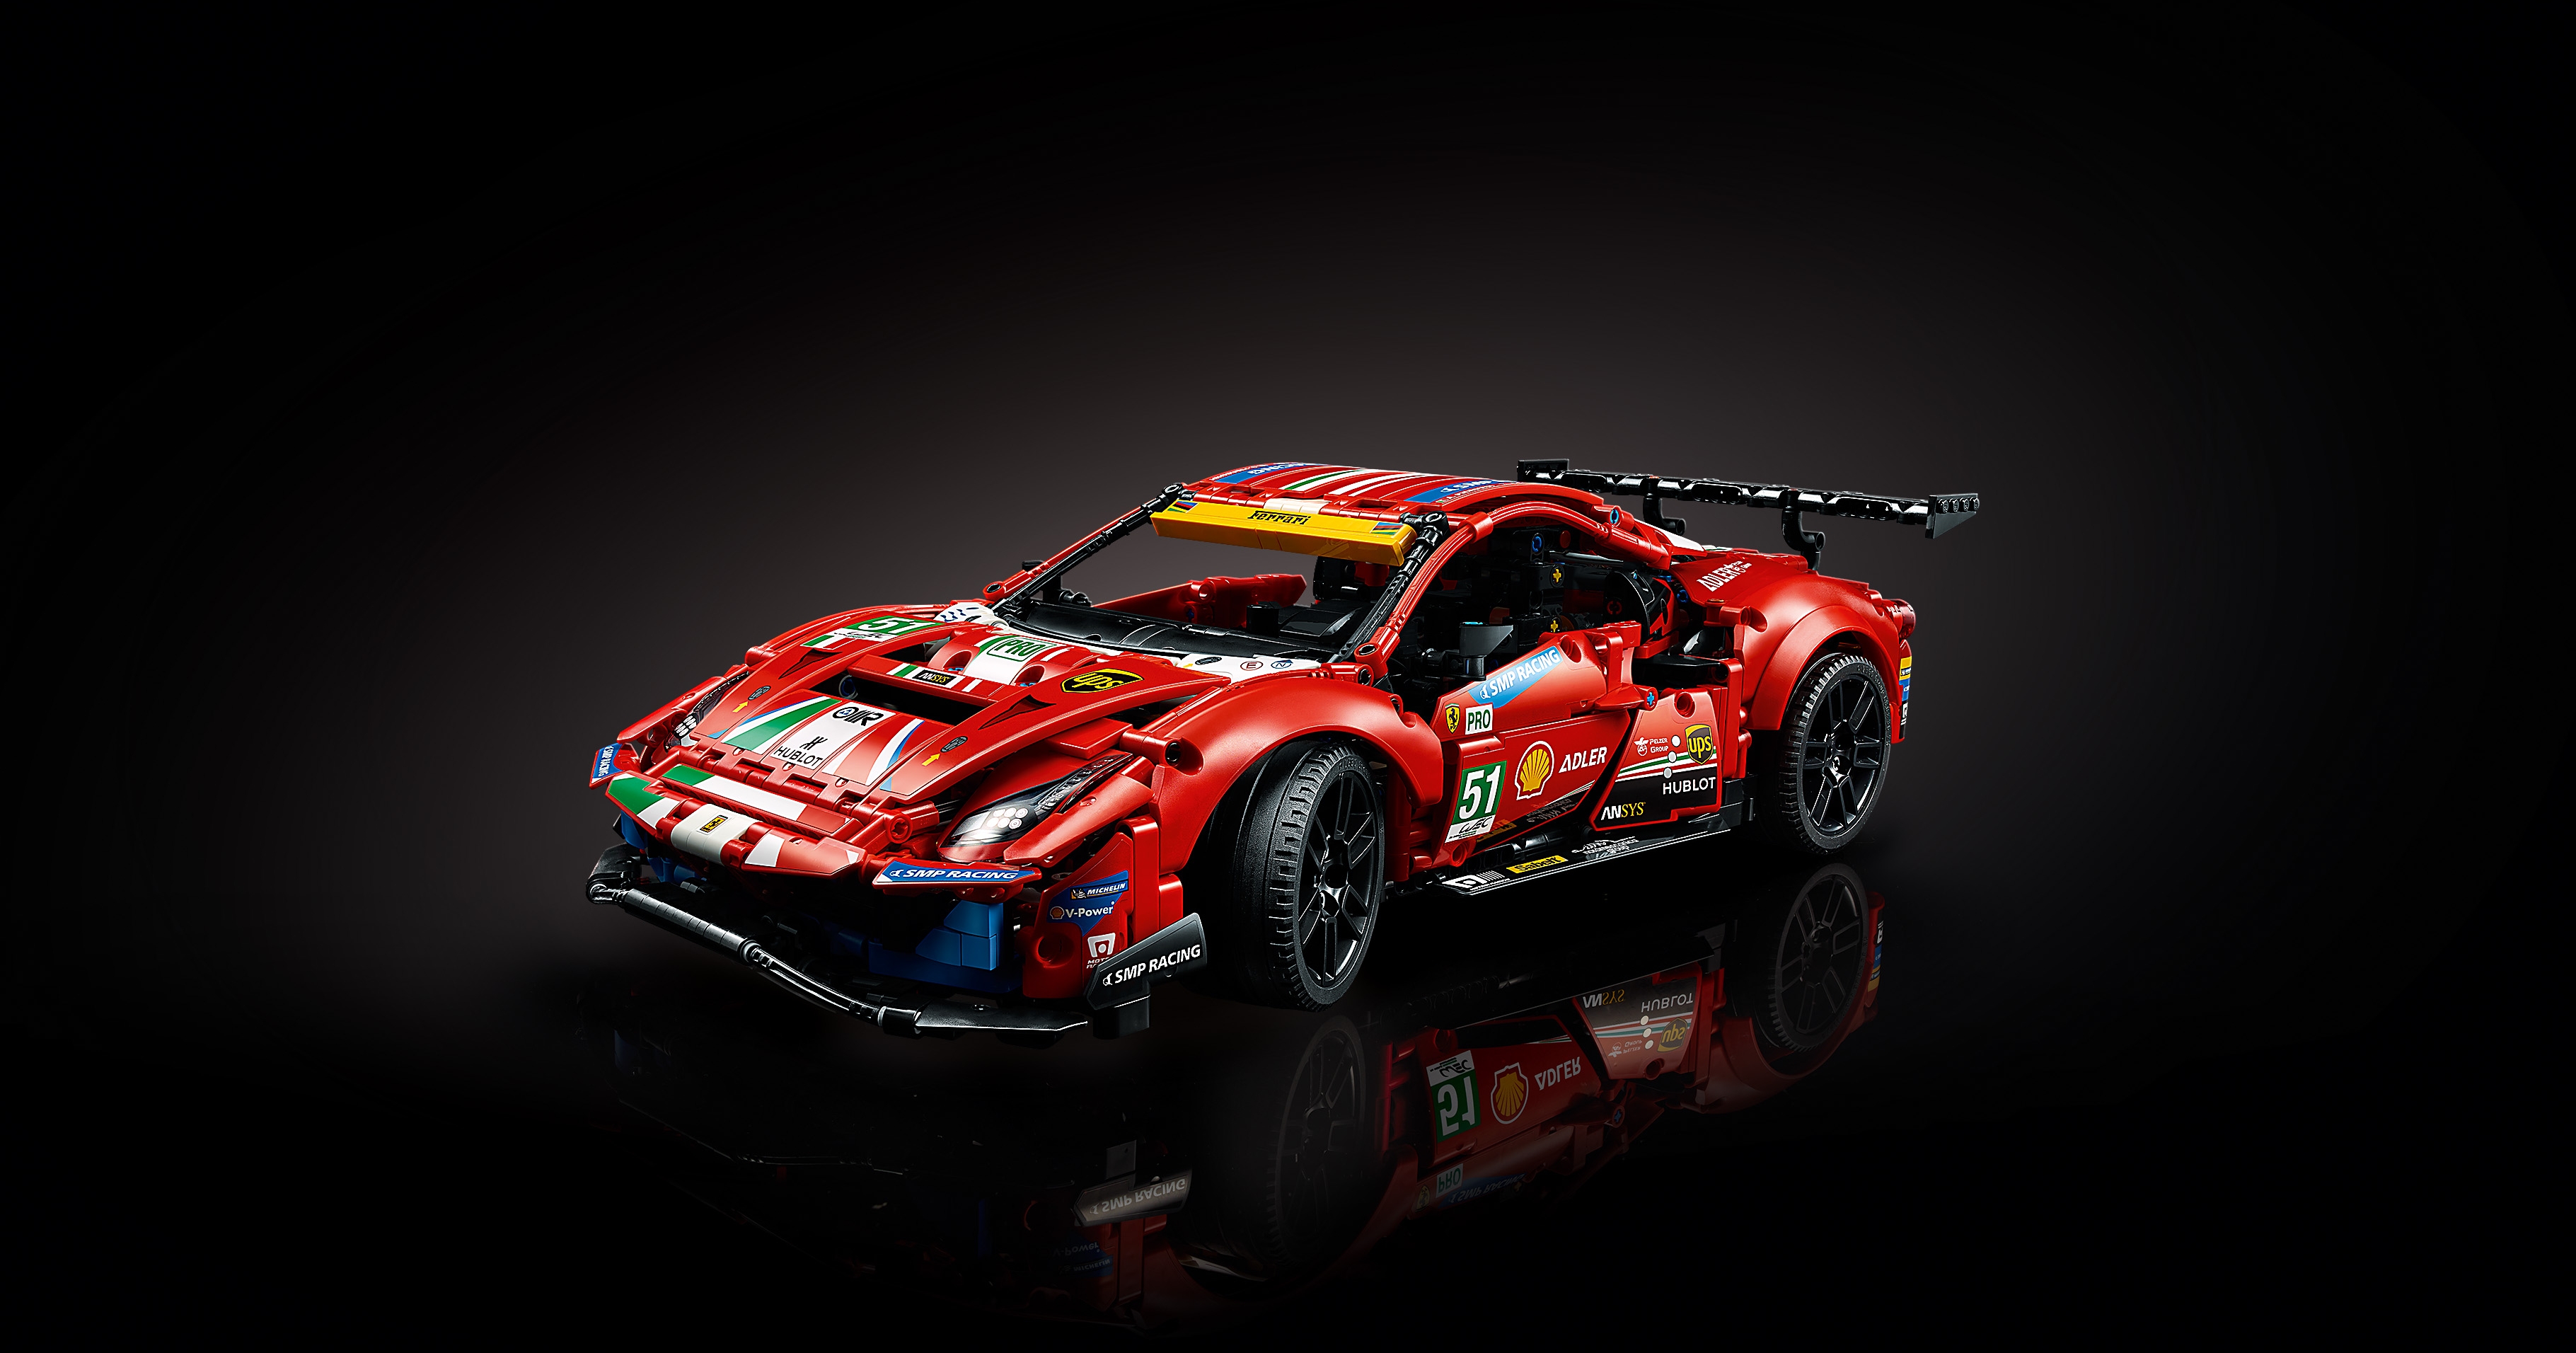 LEGO Technic Ferrari 488 GTE Becomes The First LEGO Model To Lap A